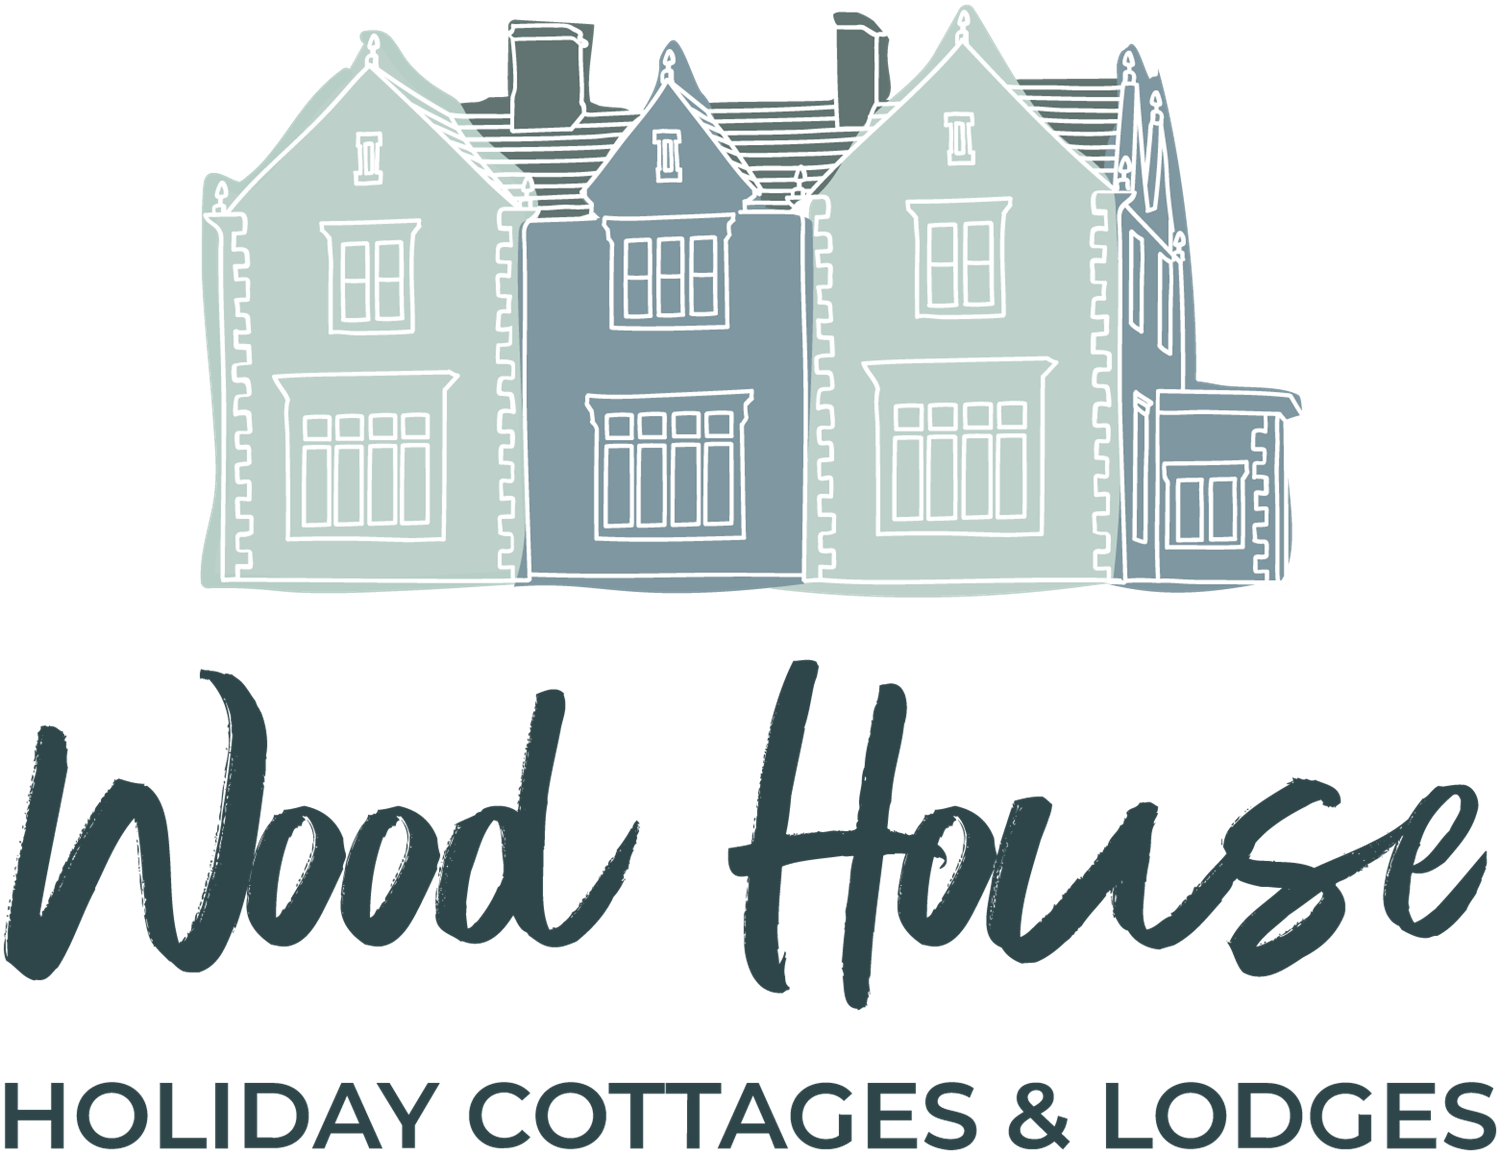 Wood House Holiday Cottages and Lodges